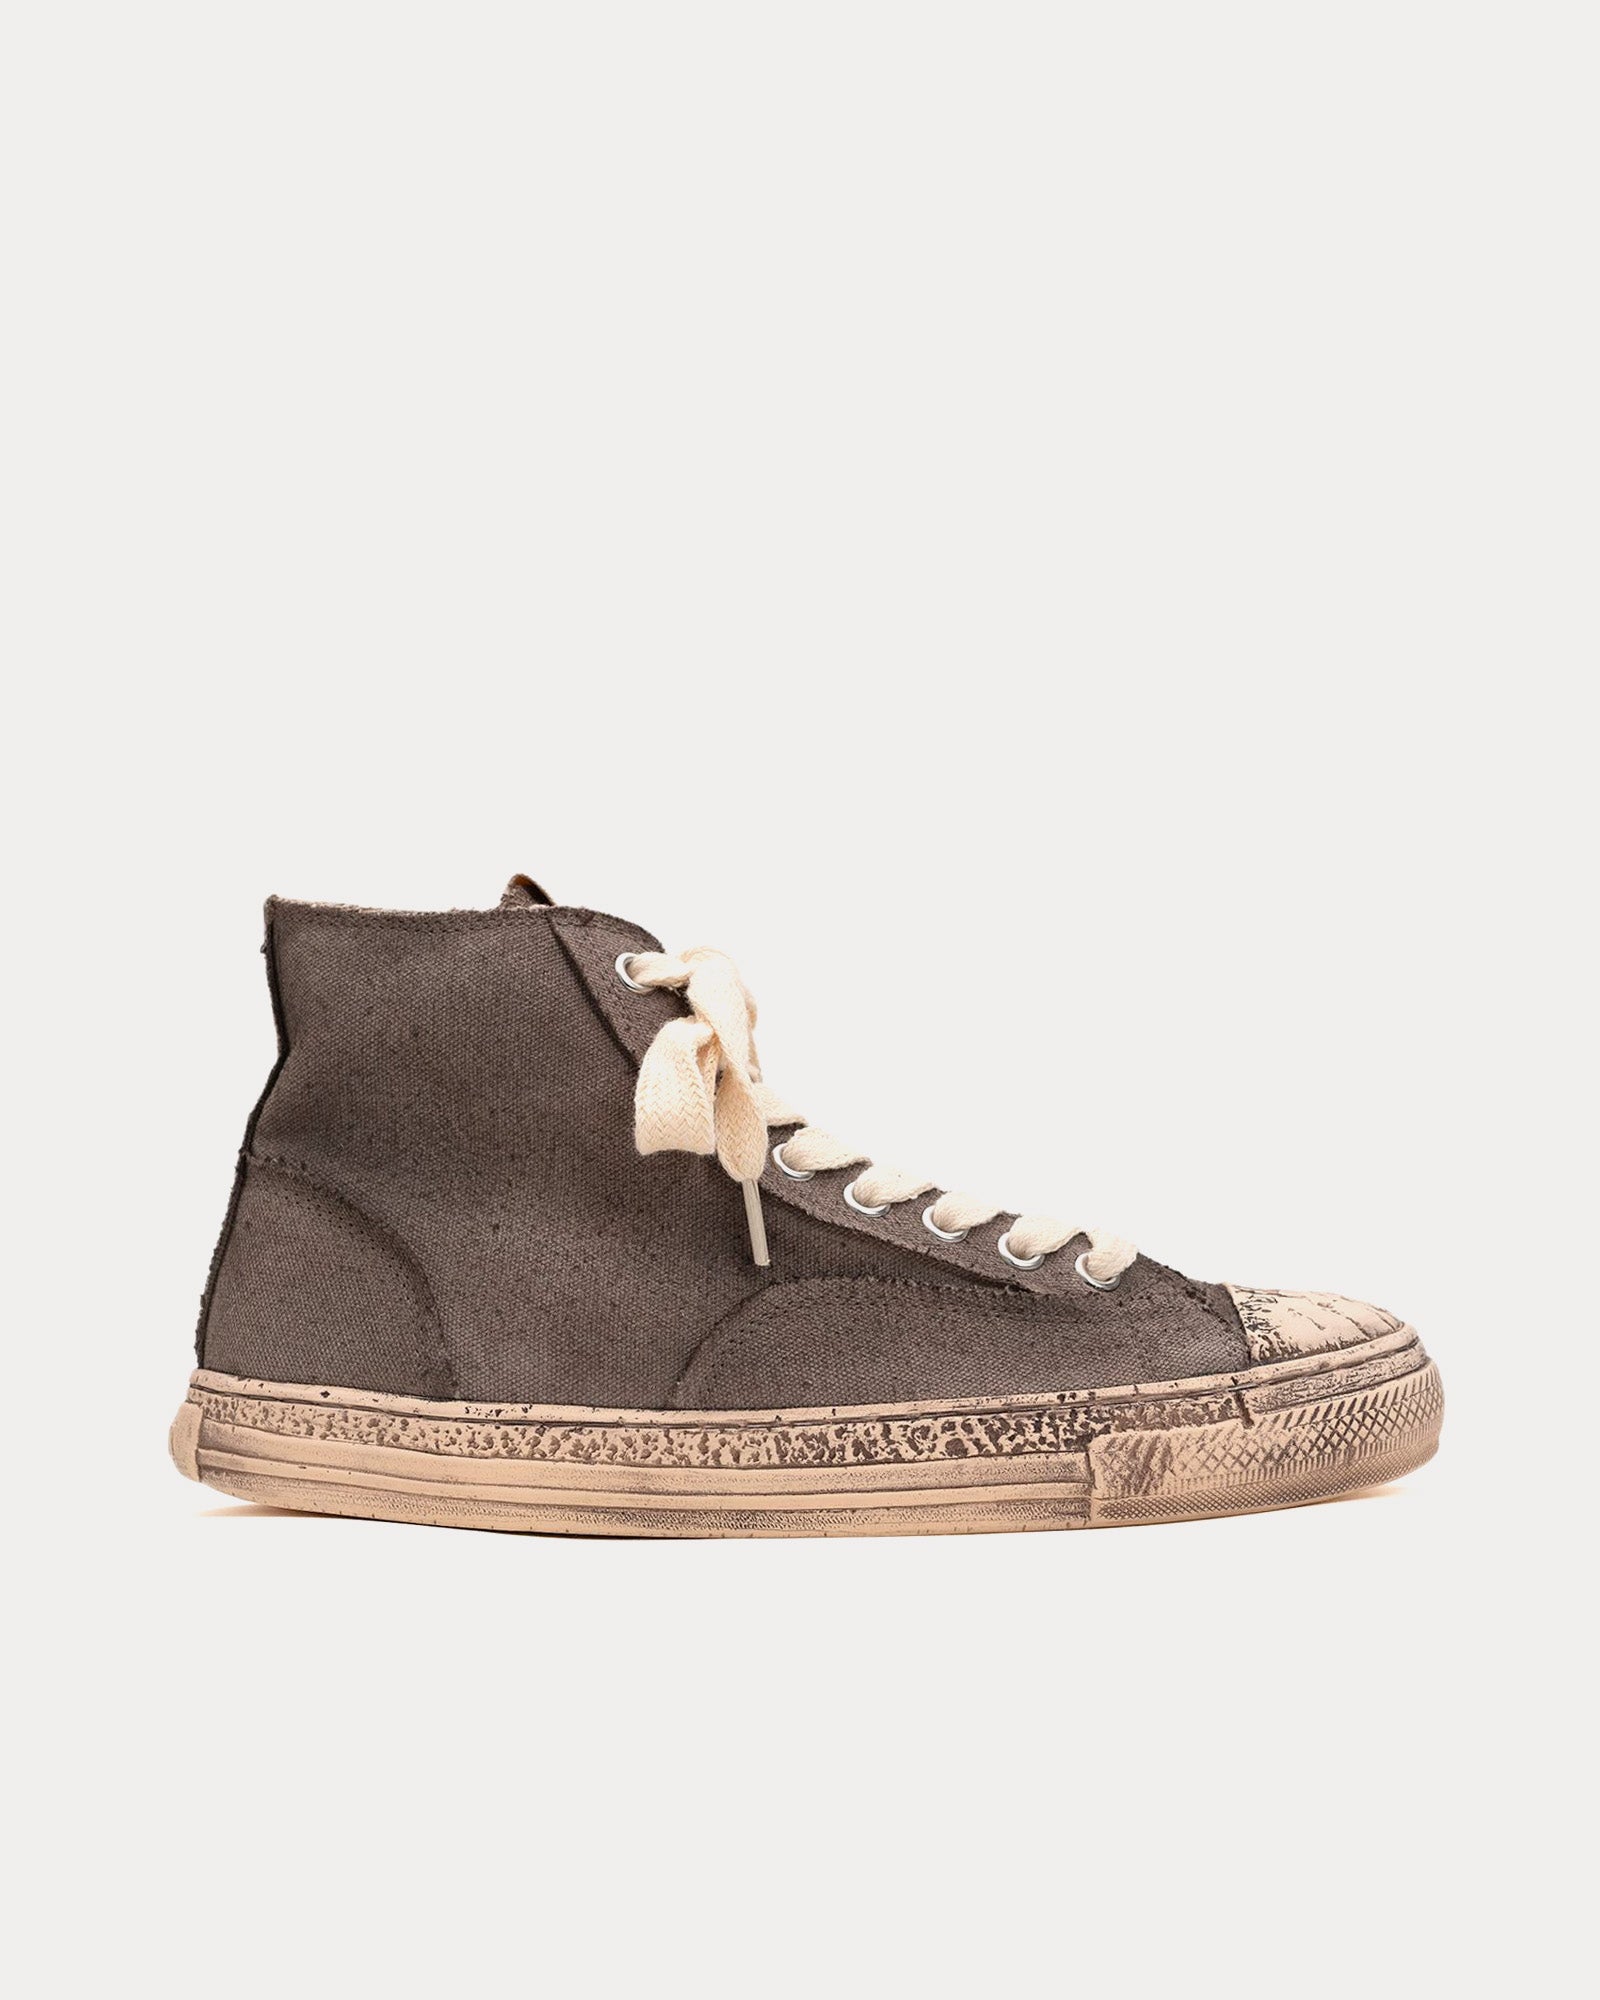 General Scale By Maison Mihara Yasuhiro - Past Sole Overdyed Canvas Grey High Top Sneakers